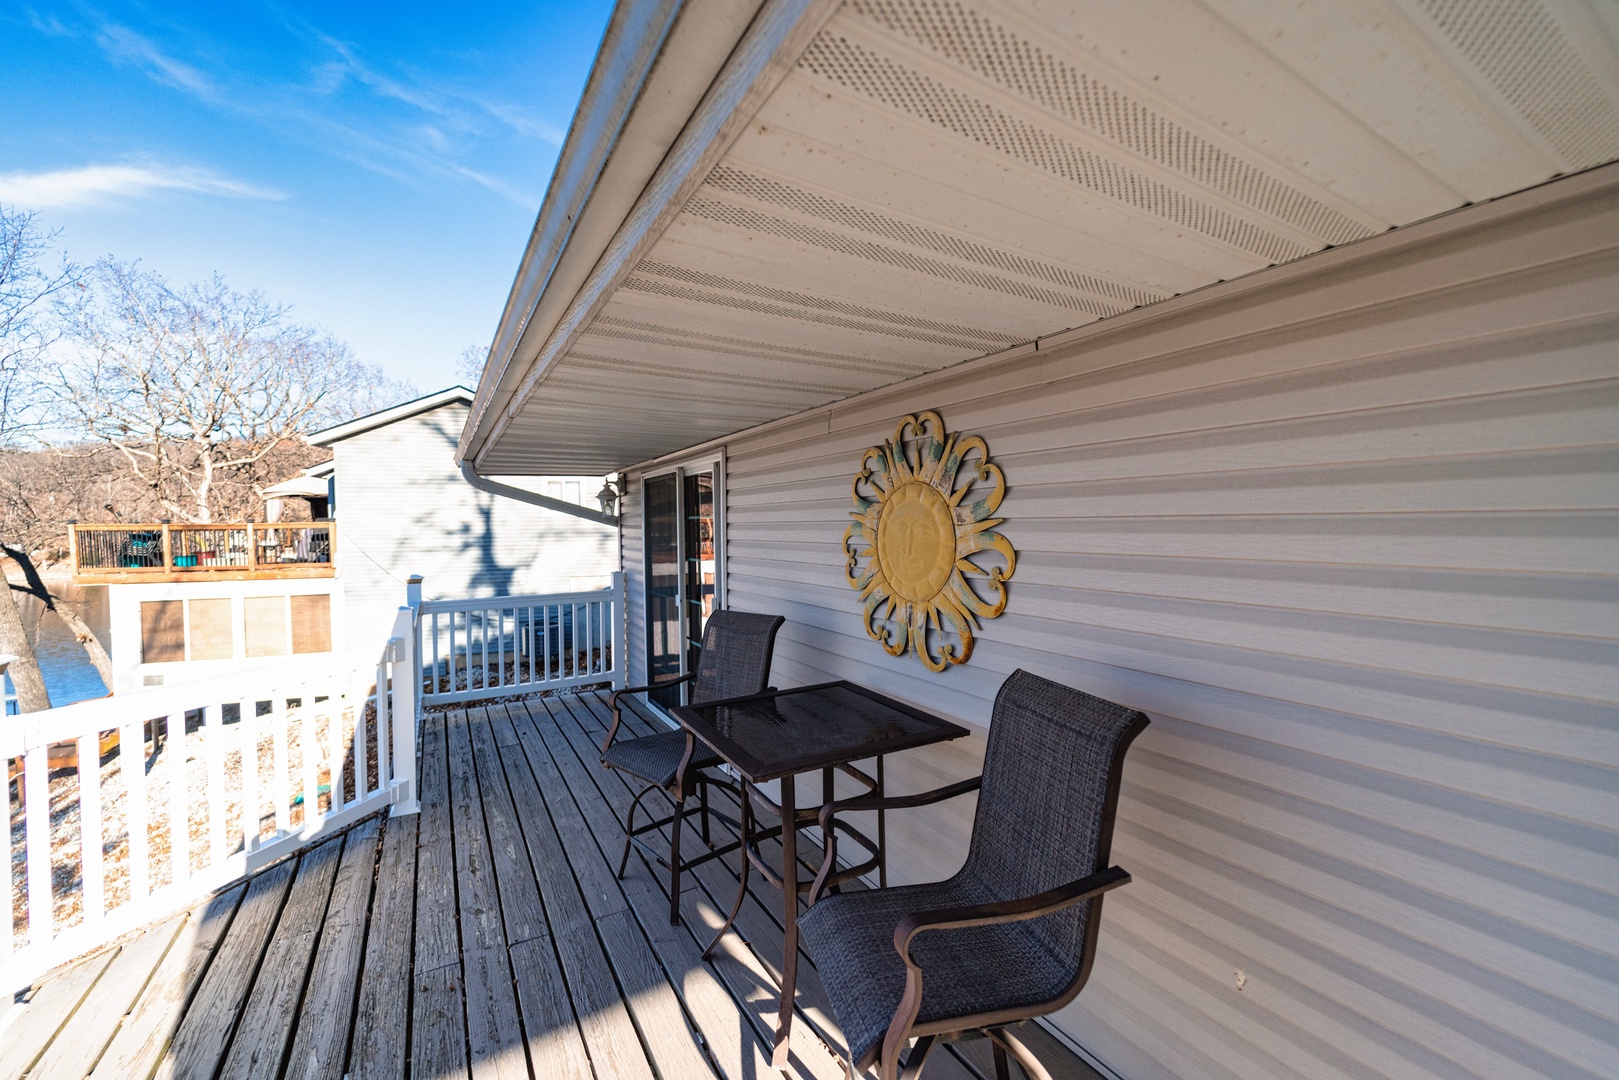 Step out onto the upper-level deck & relax in the fresh air